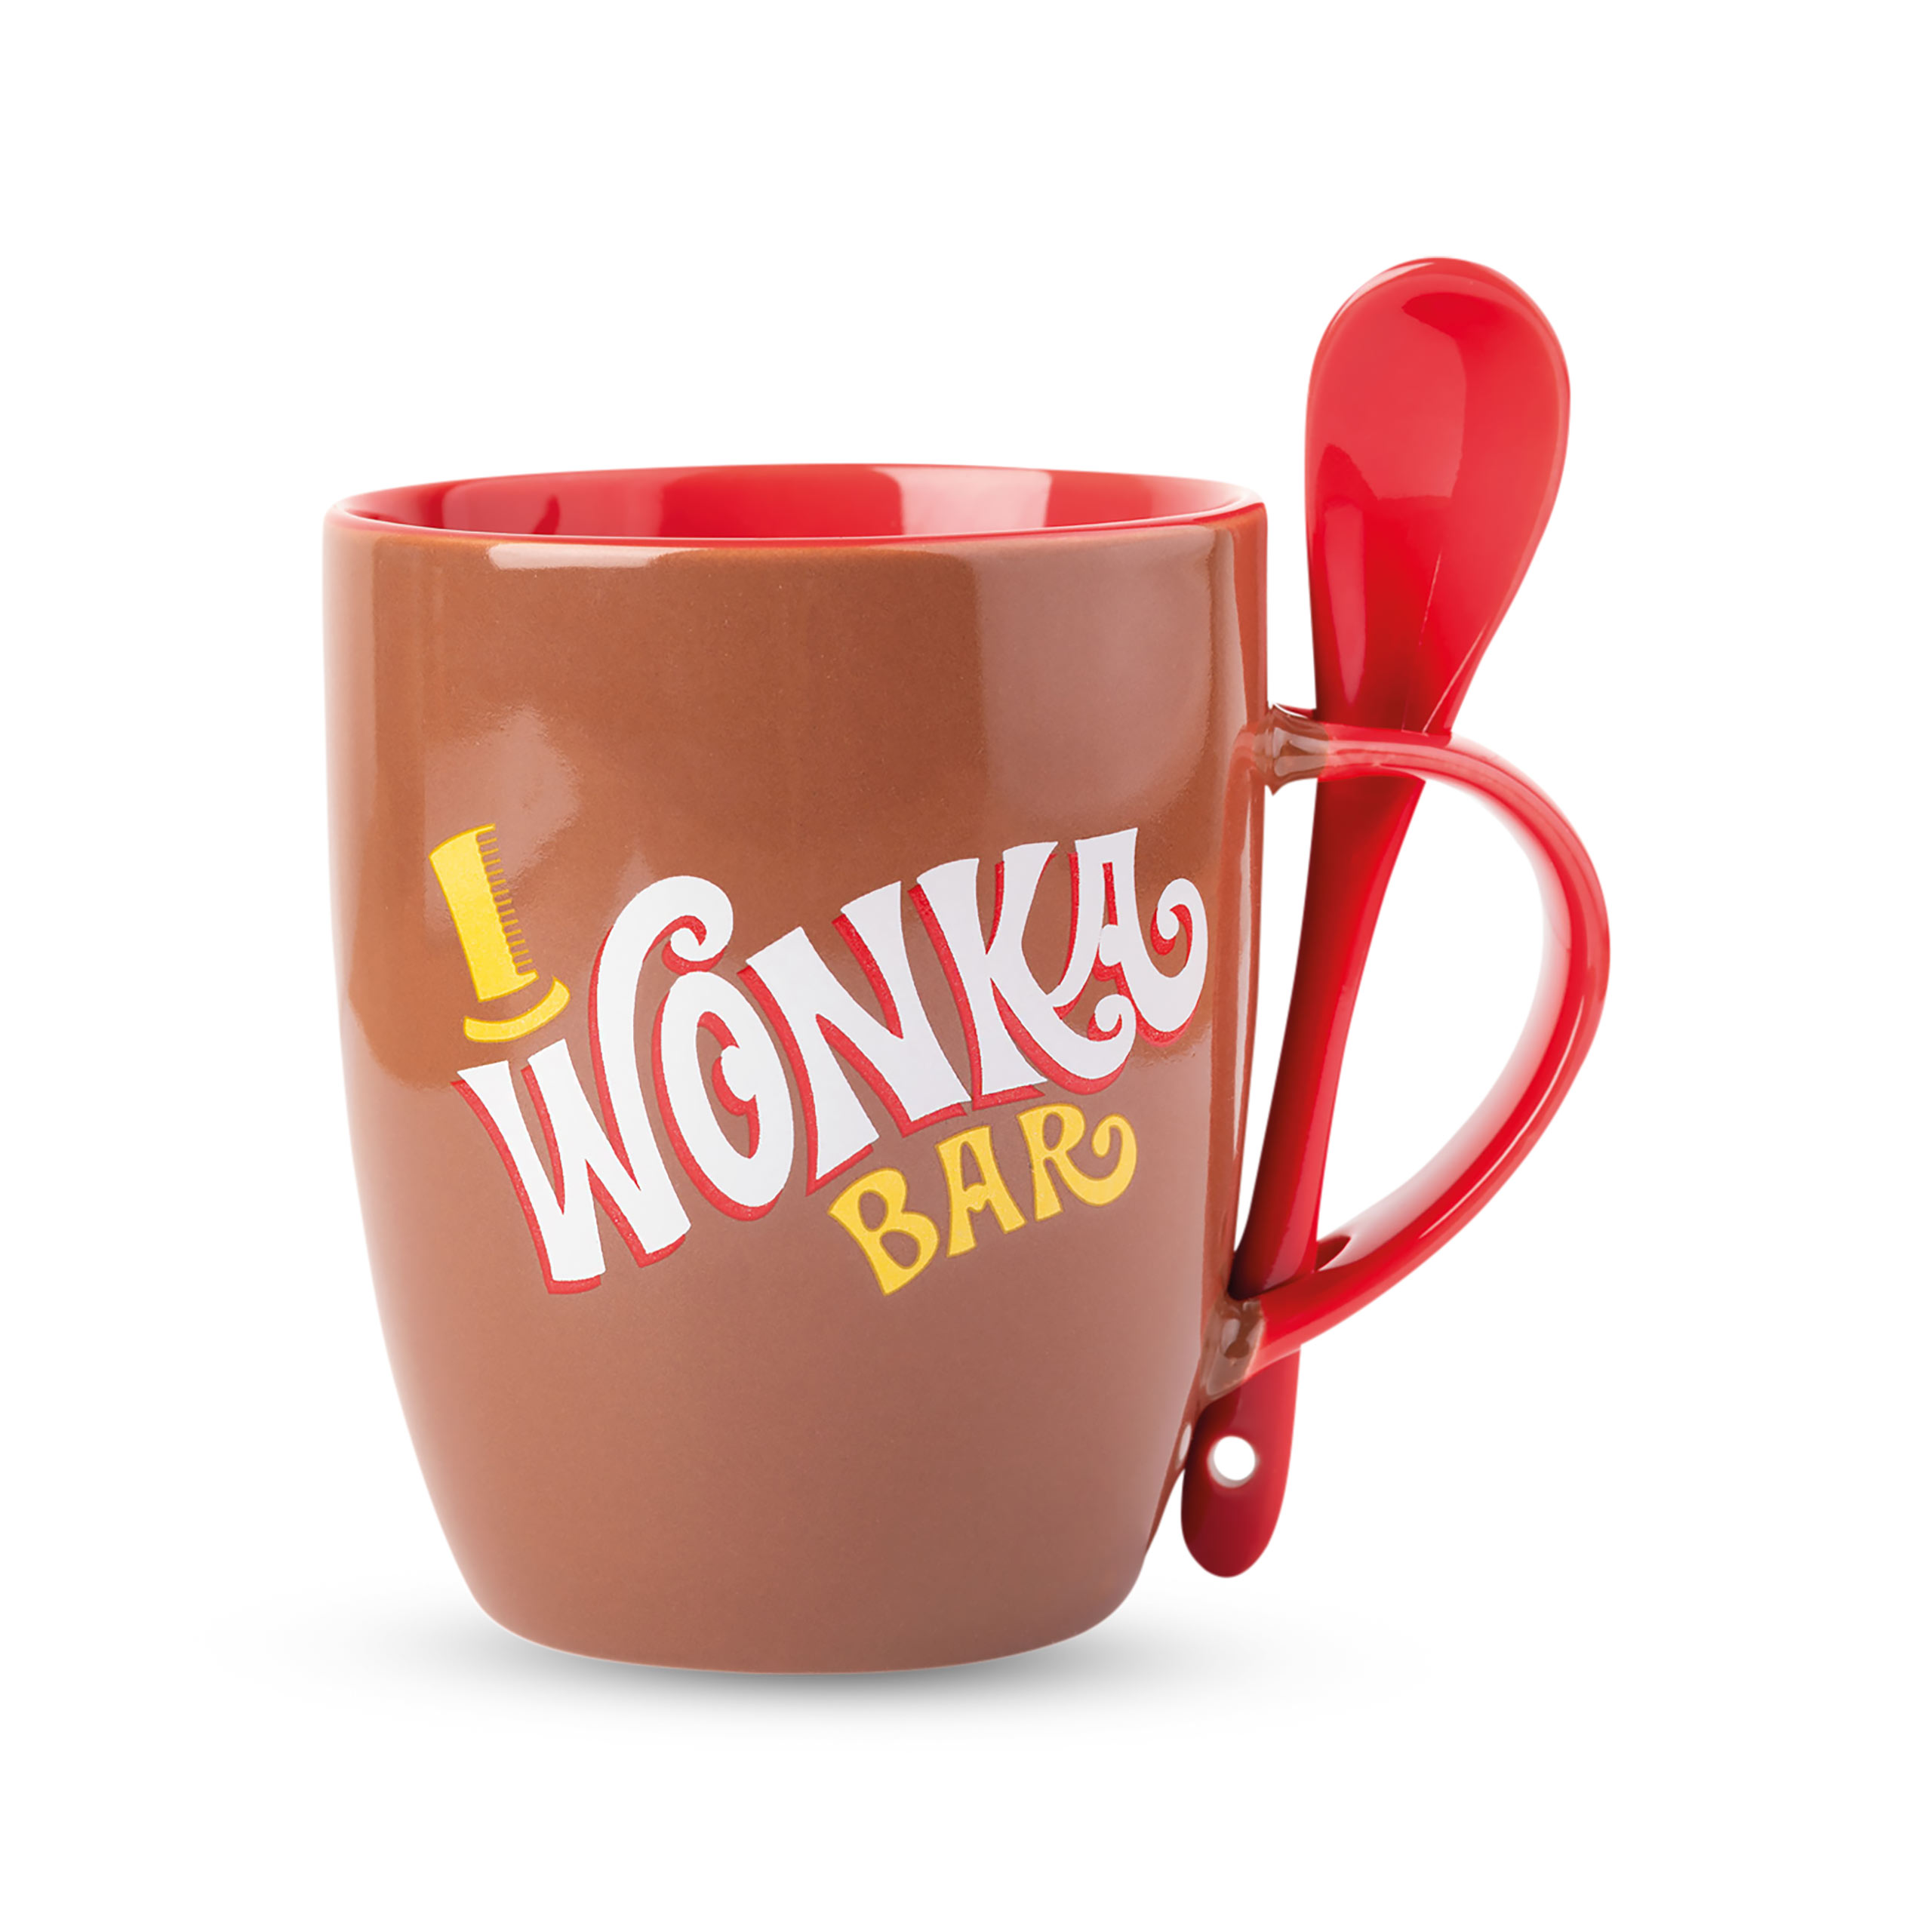 Willy Wonka Mug with Spoon - Charlie and the Chocolate Factory